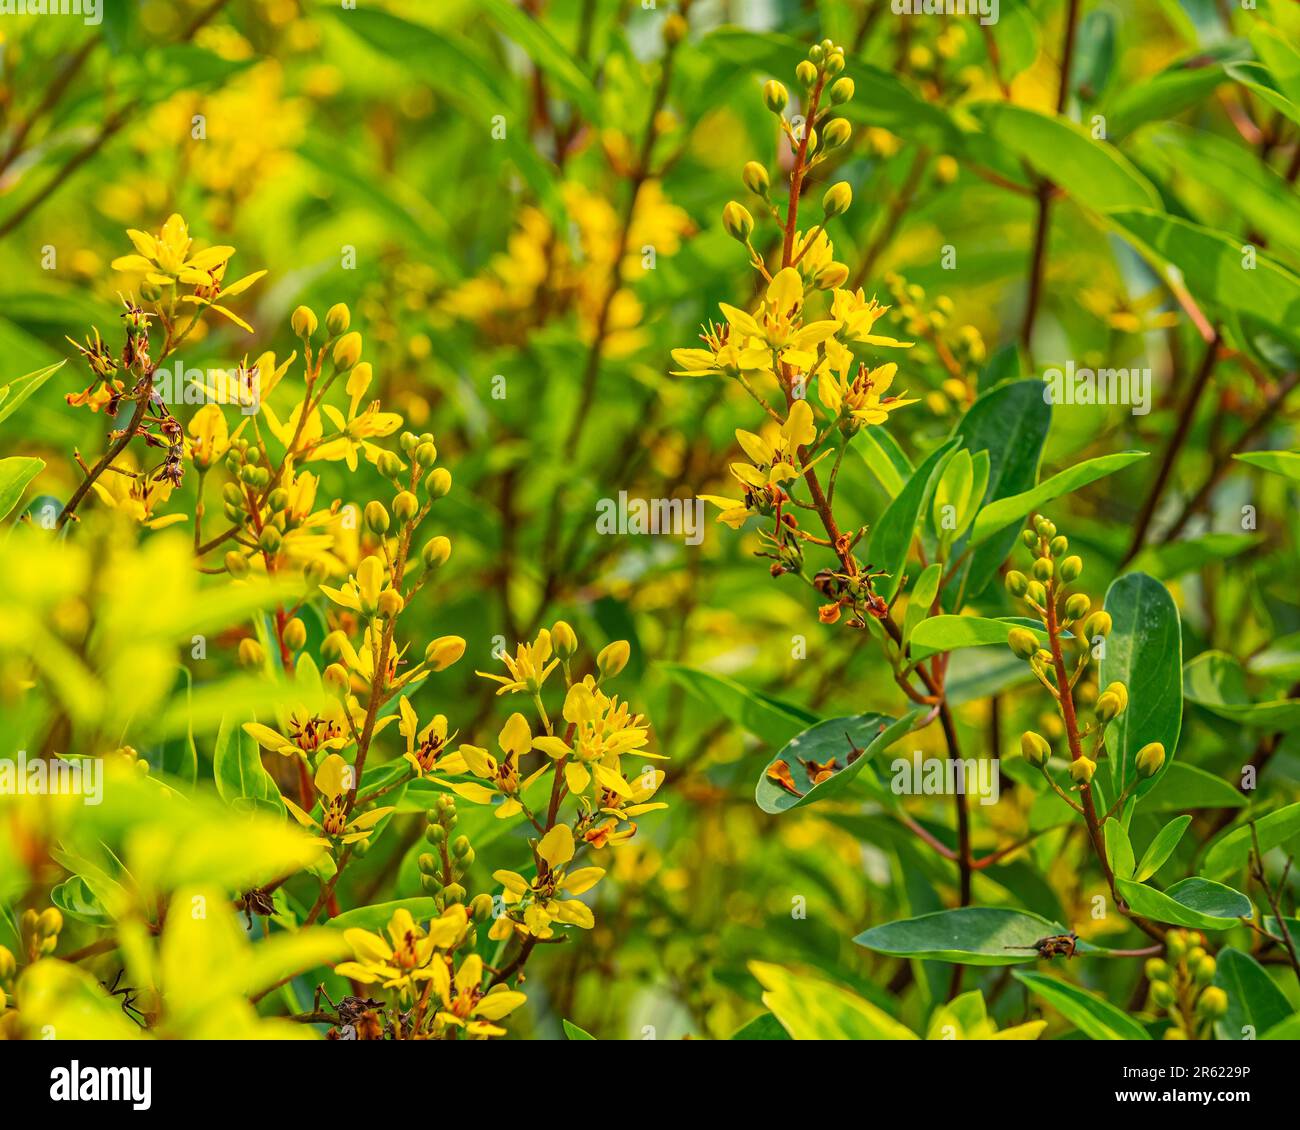 A vibrant outdoor scene featuring lush green bushes with bright yellow Galphimia Gracilis basking in the warm sunlight Stock Photo